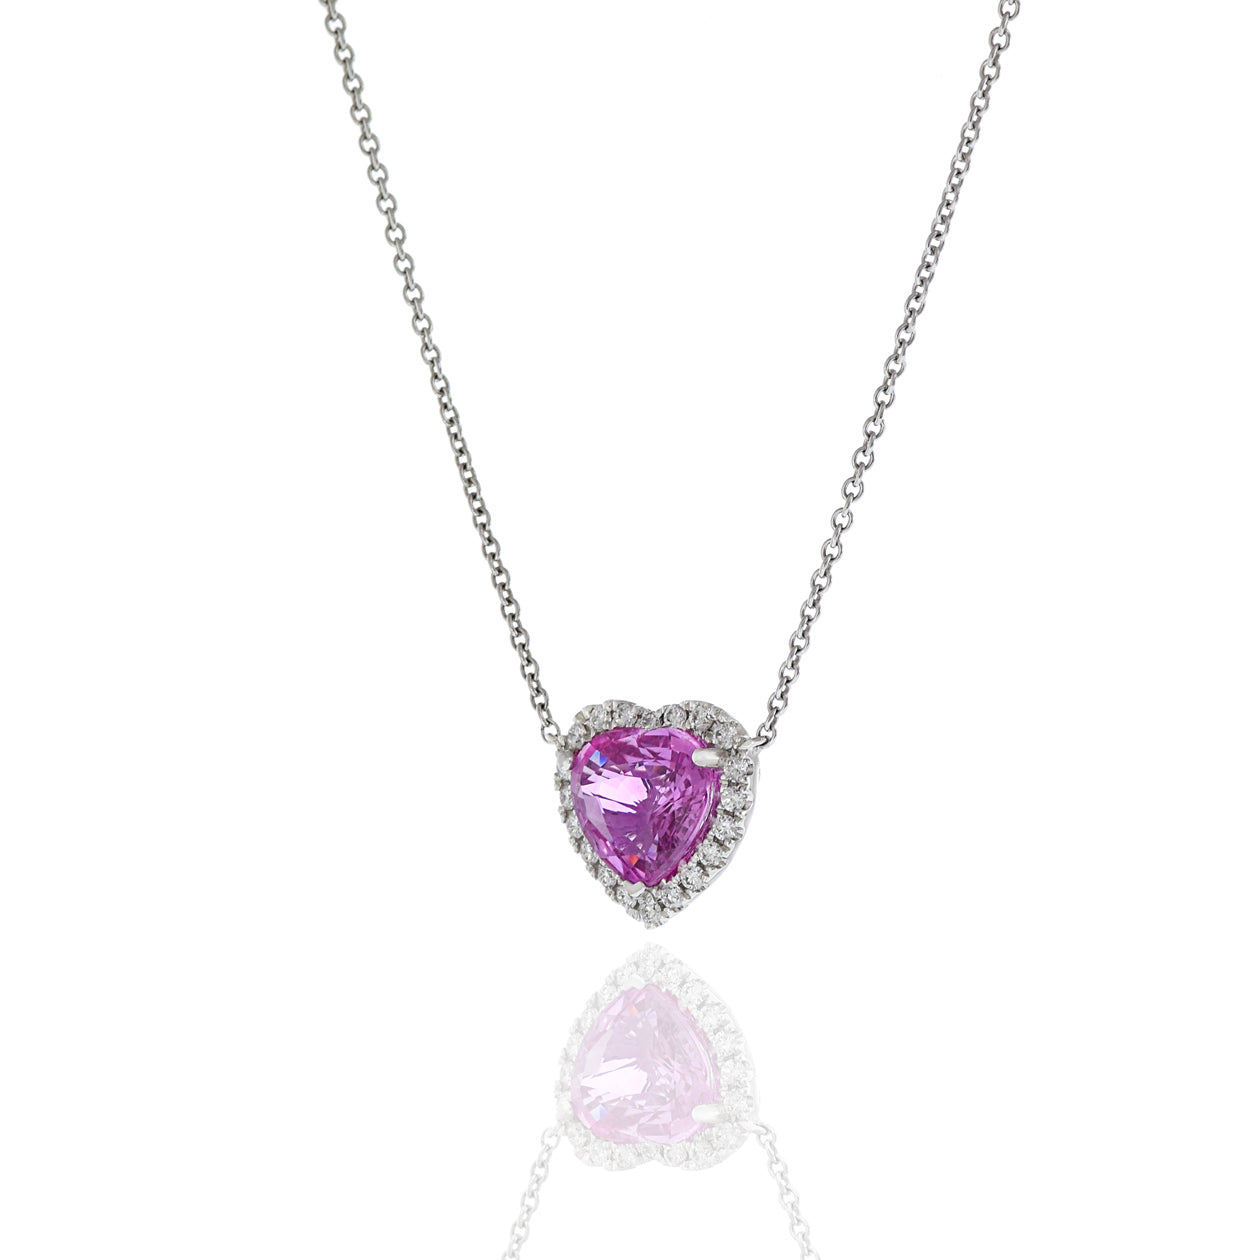 18KT White Gold Heart Shaped Pink Sapphire And Diamond Necklace